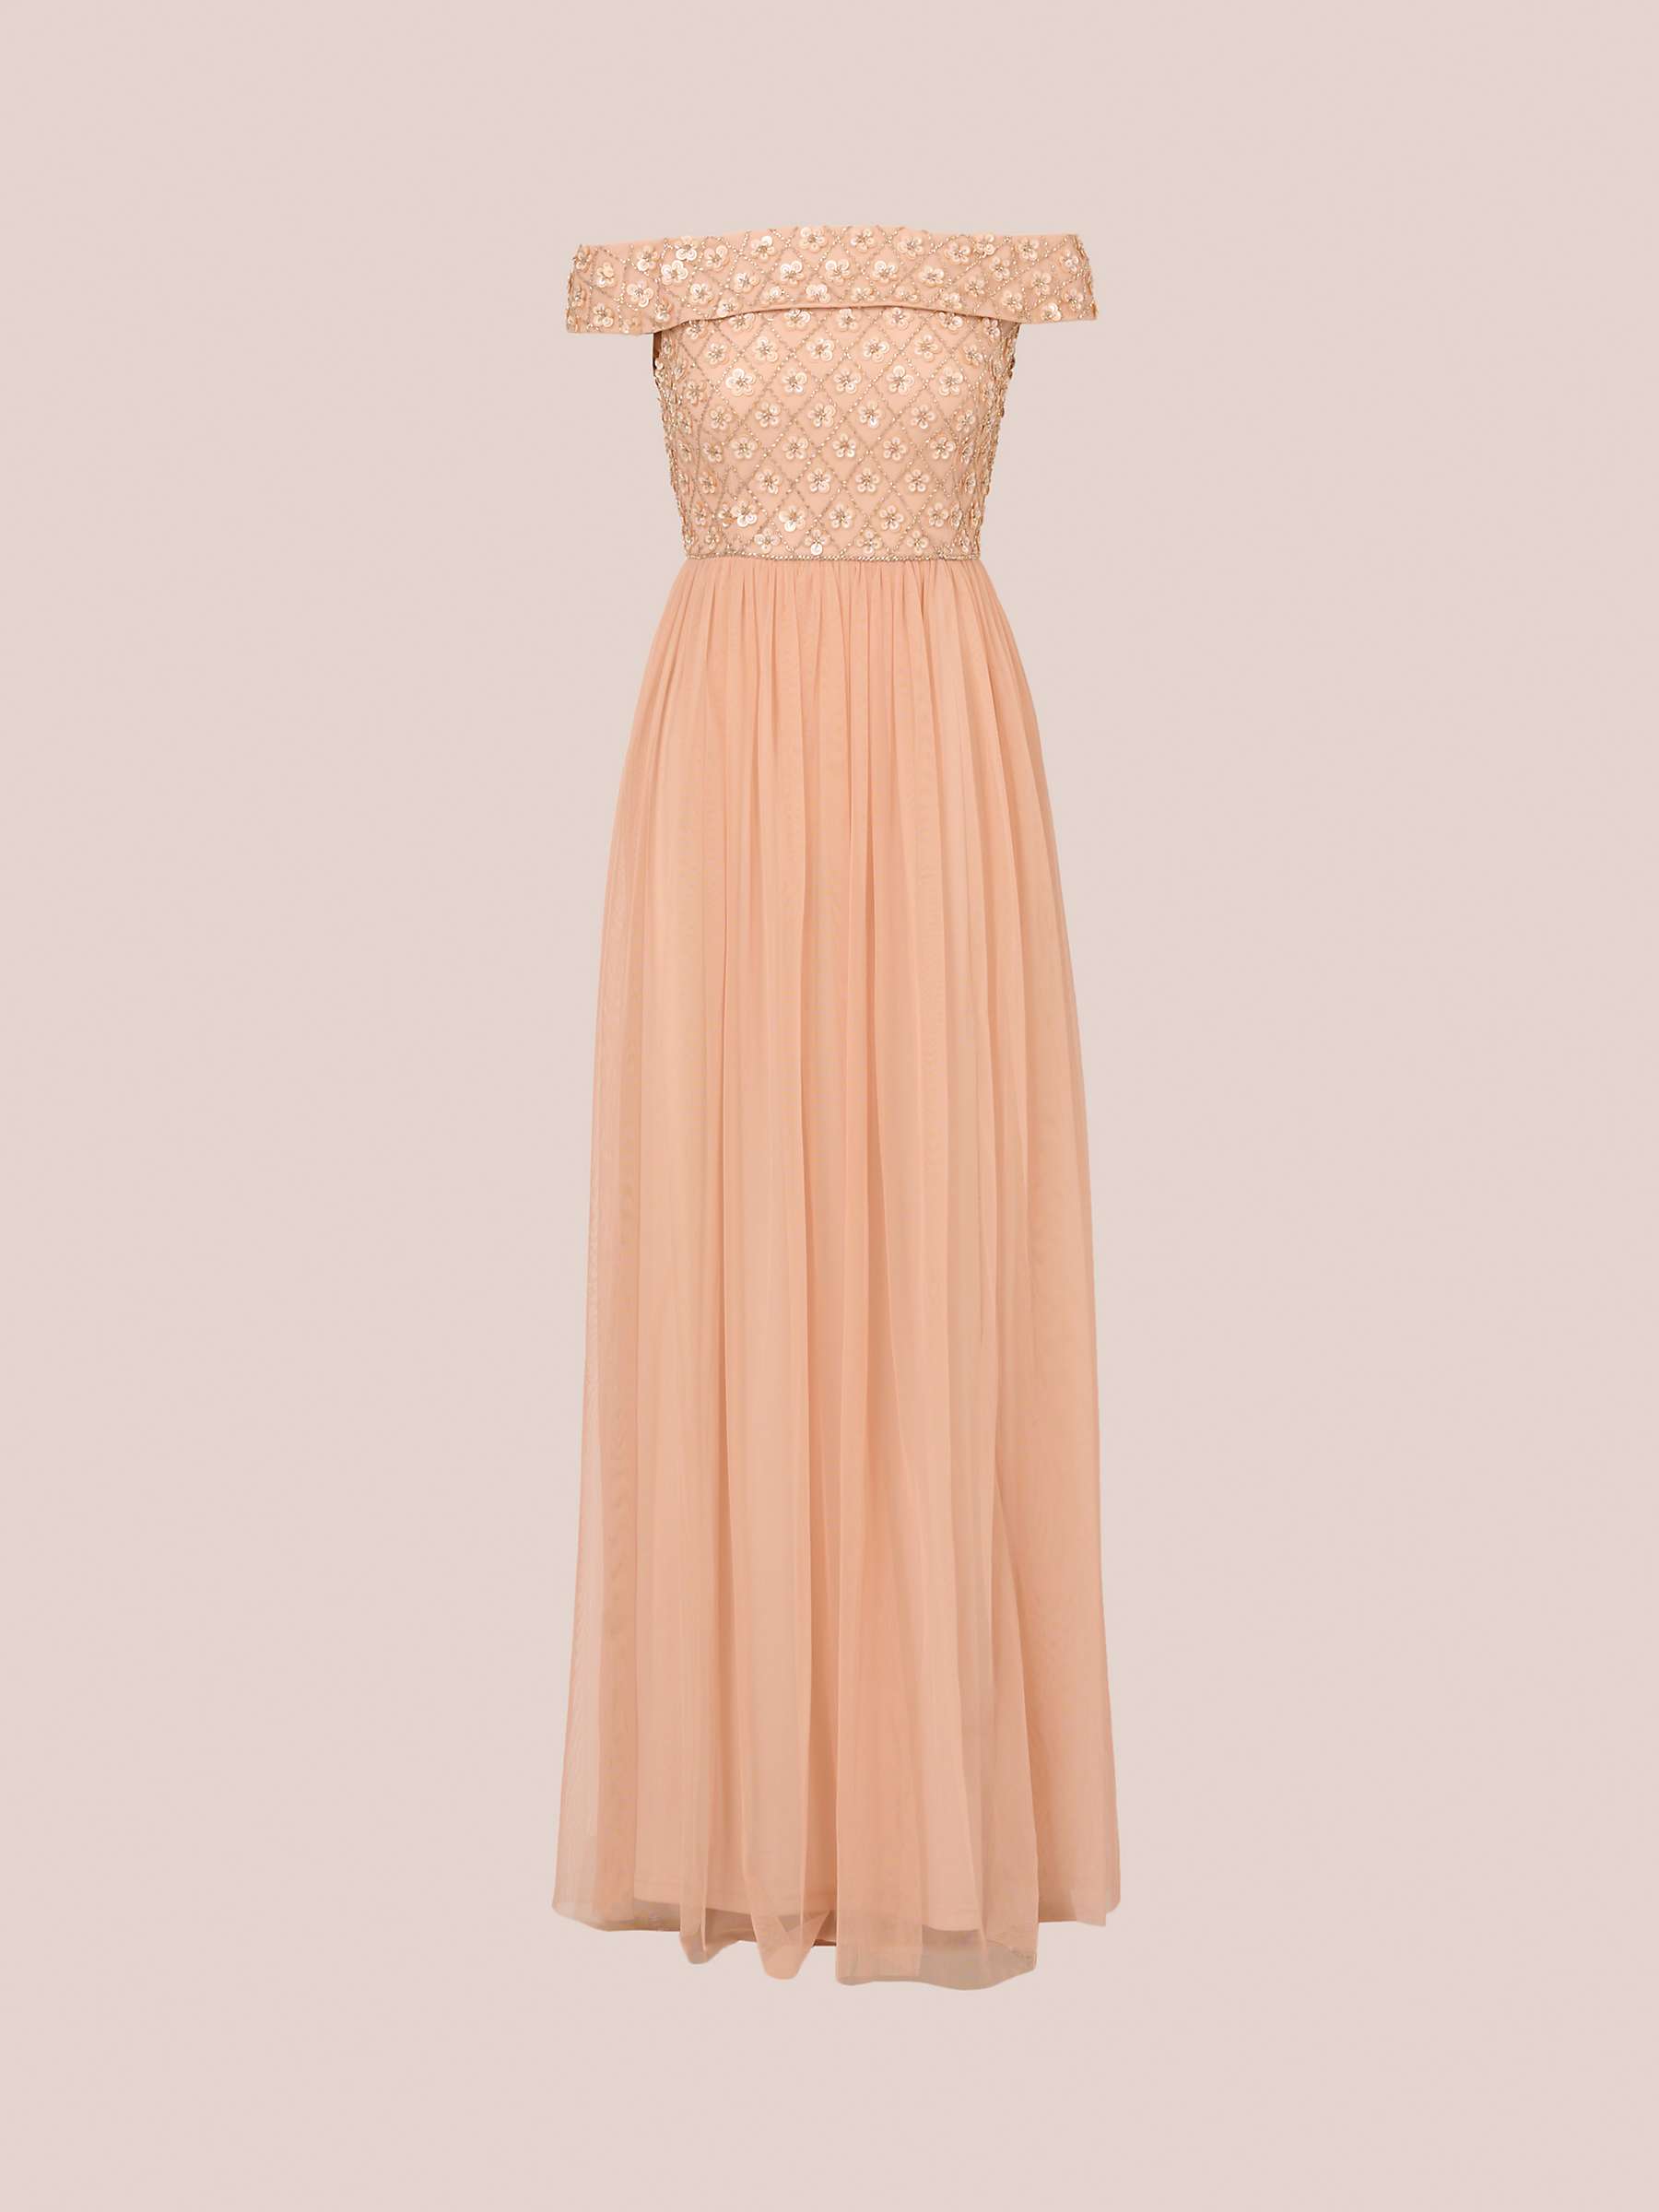 Buy Adrianna Papell Beaded Off The Shoulder Maxi Dress, Blush Online at johnlewis.com